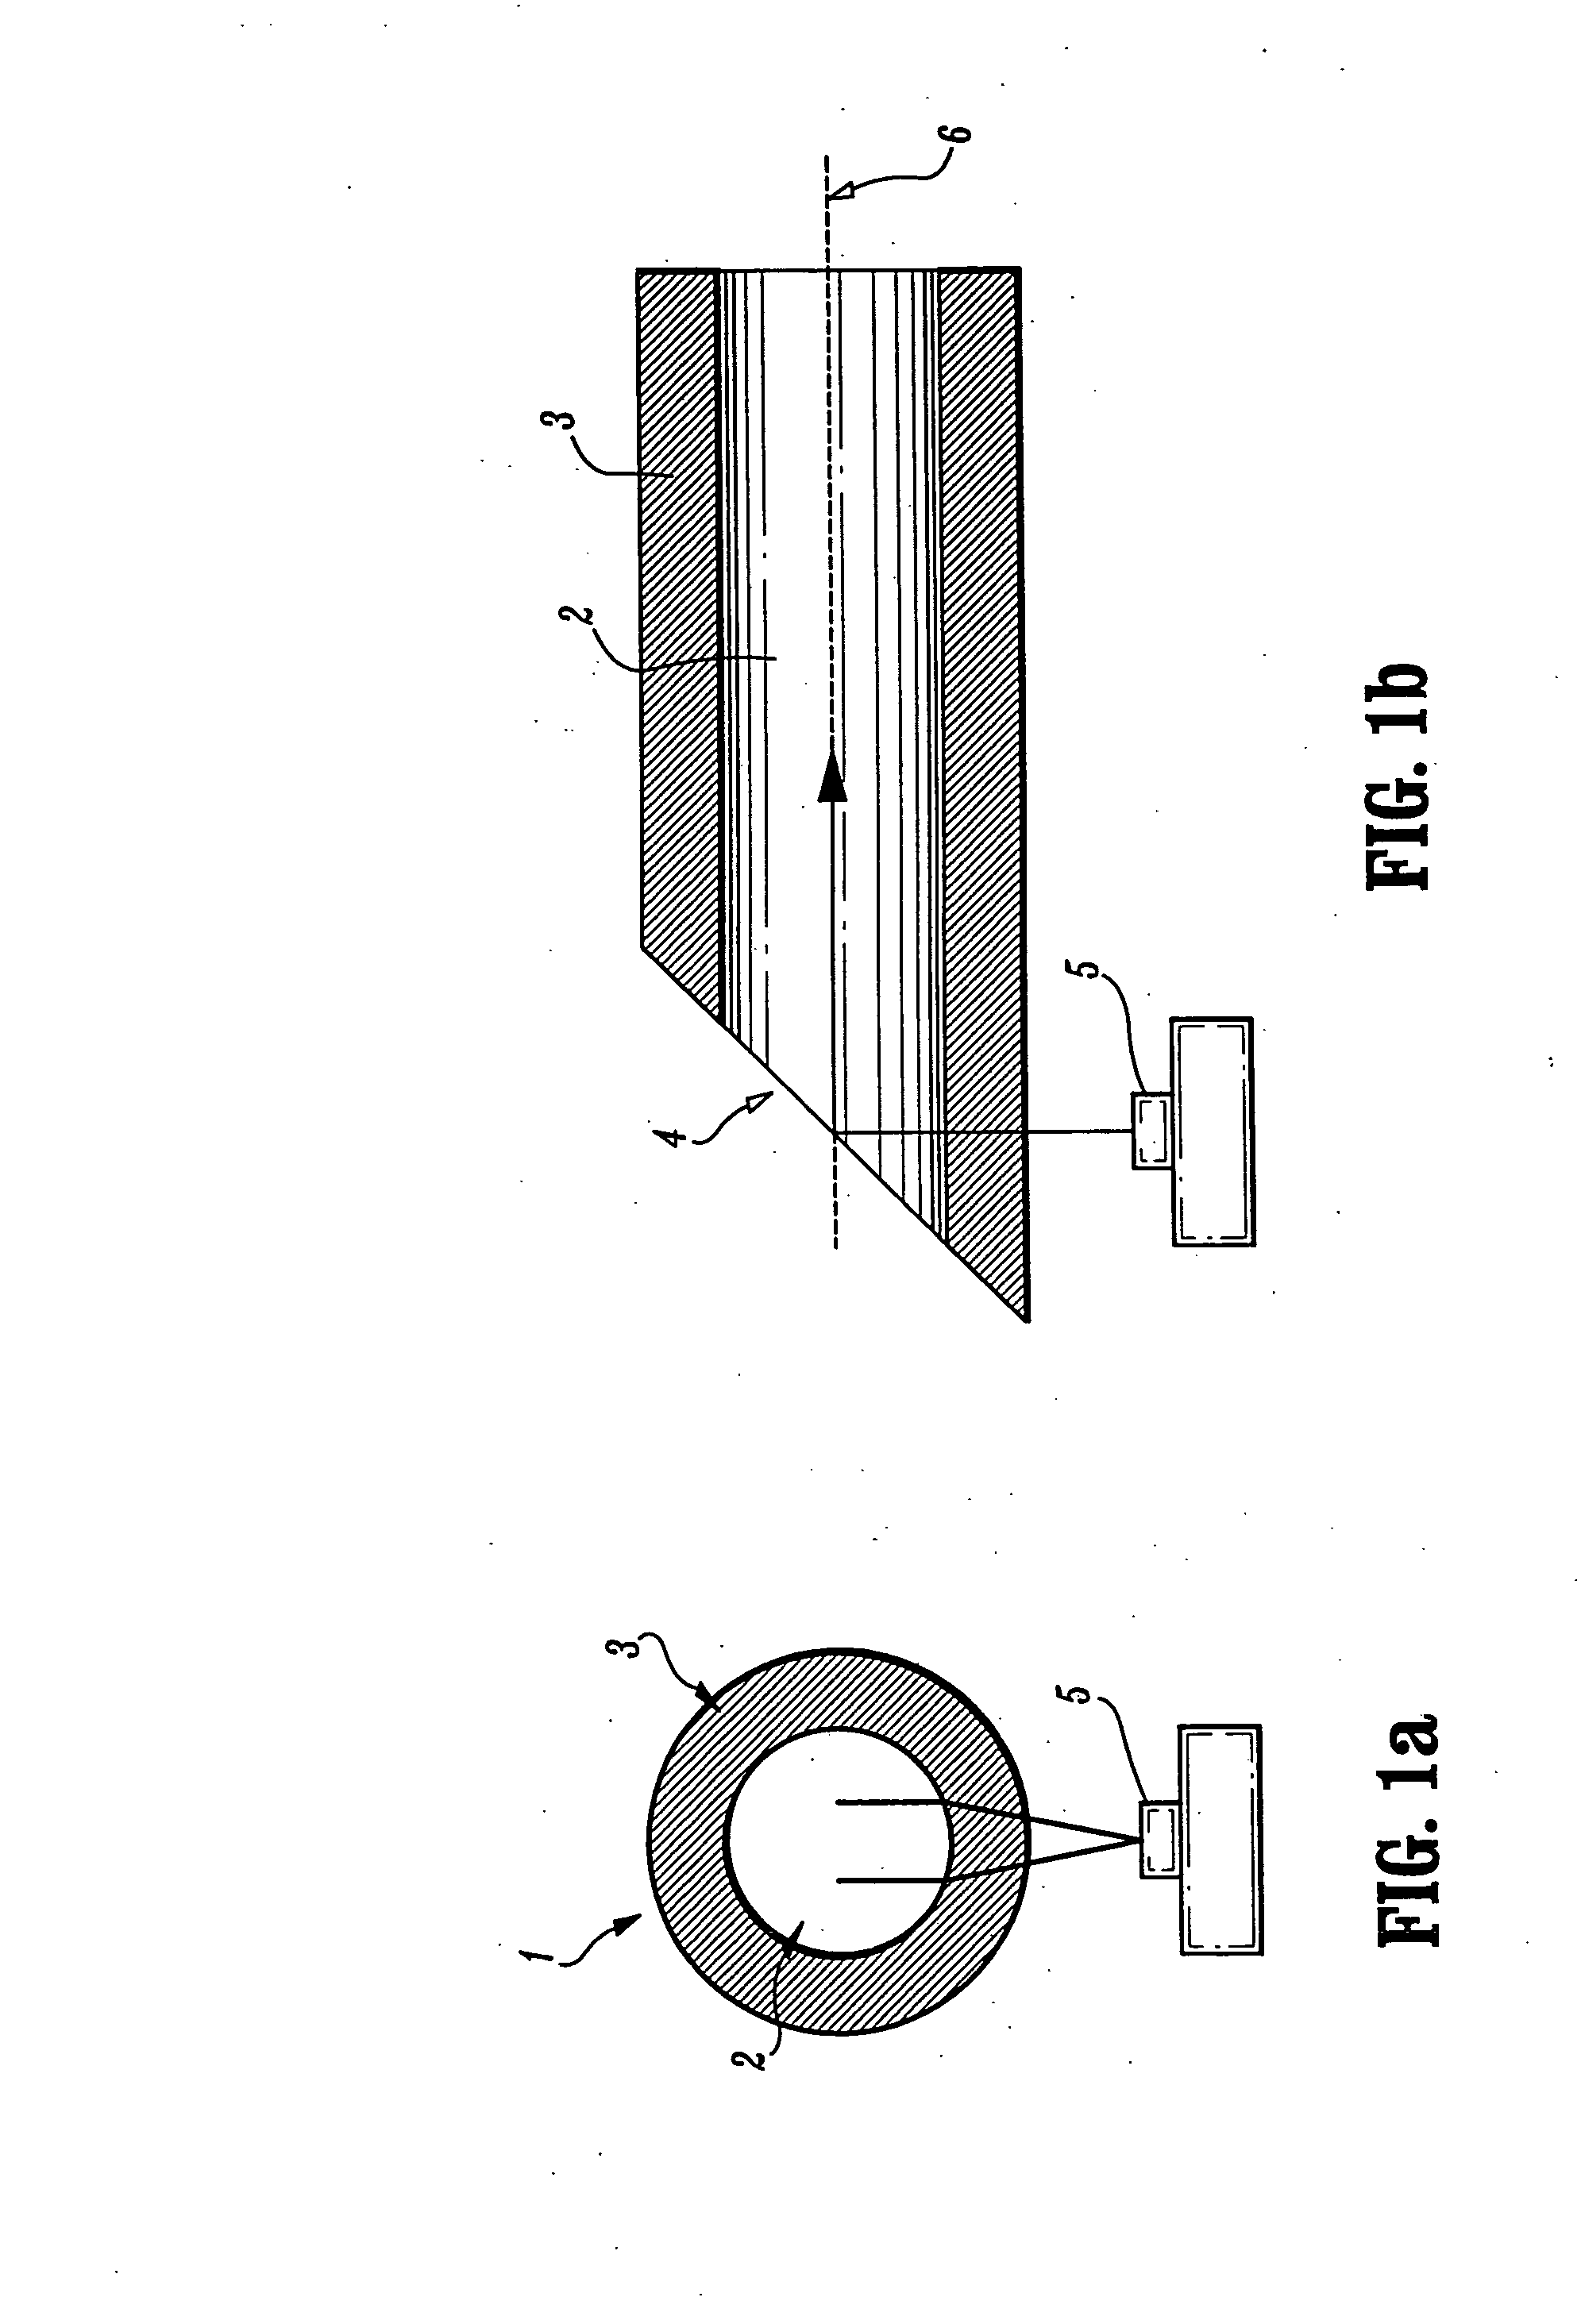 Devices and methods for side-coupling optical fibers to optoelectronic components